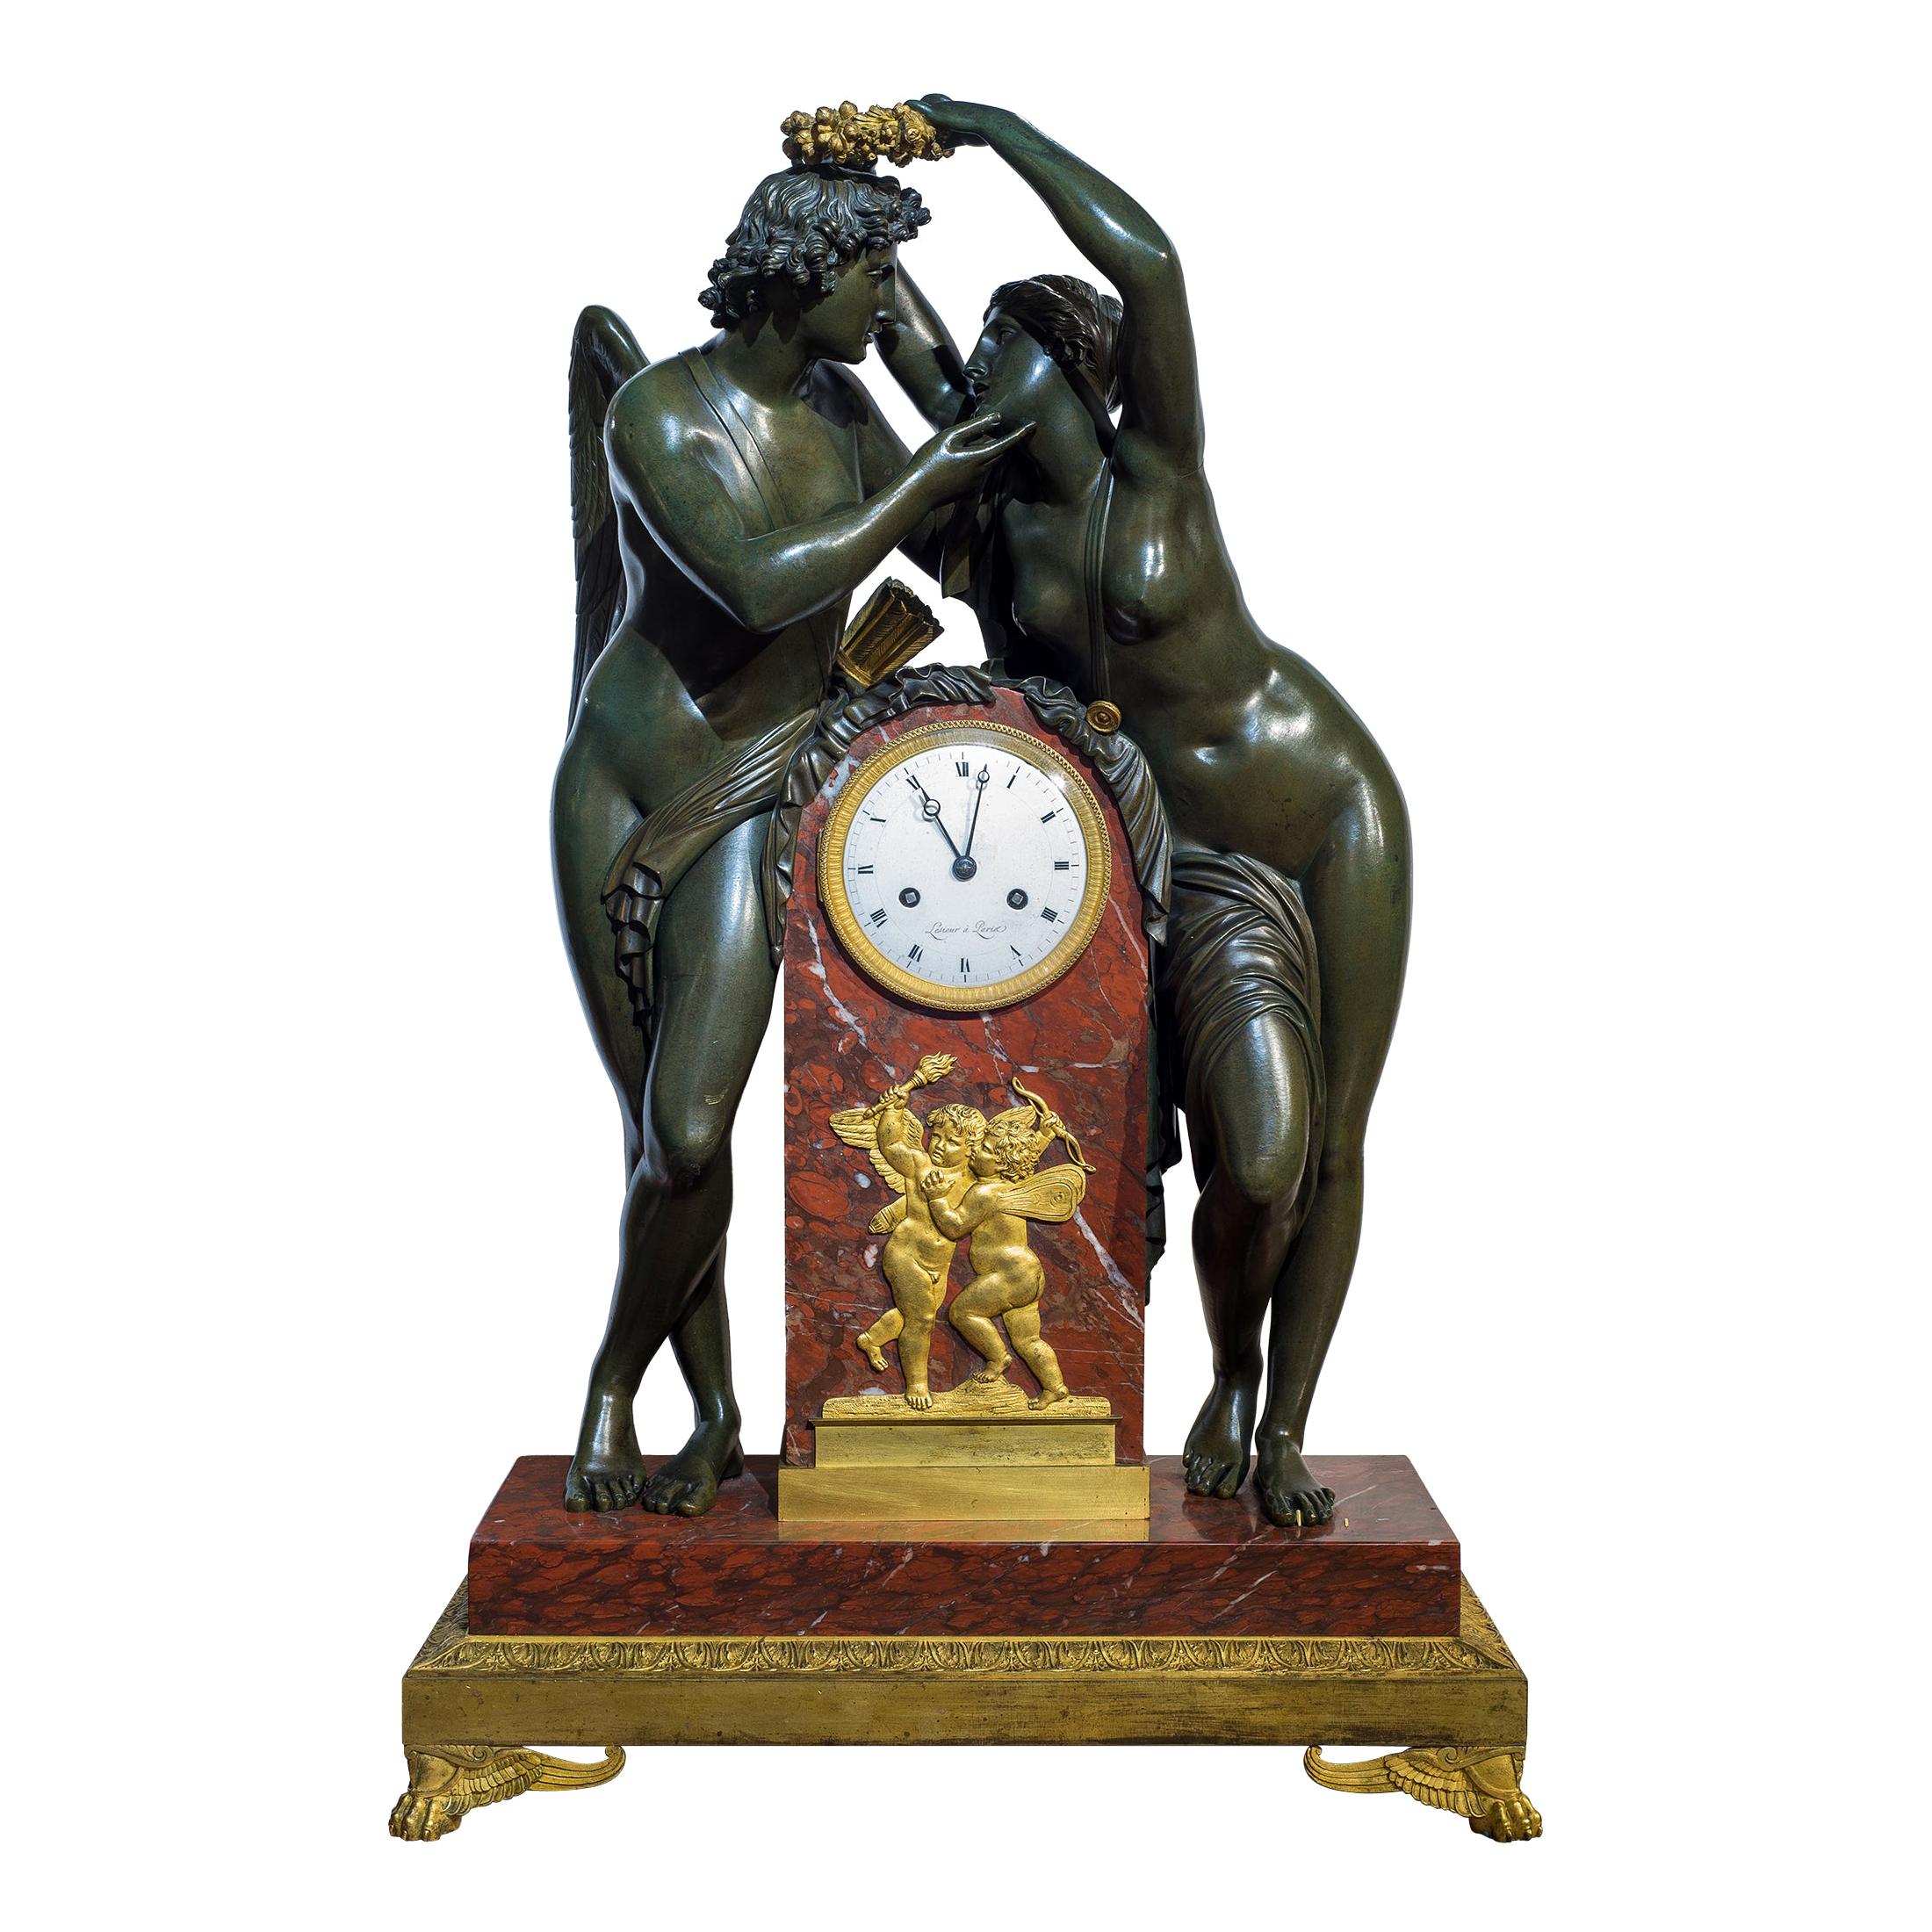 Early 19th Century Empire Ormolu-Mounted Bronze and Marble Mantel Clock